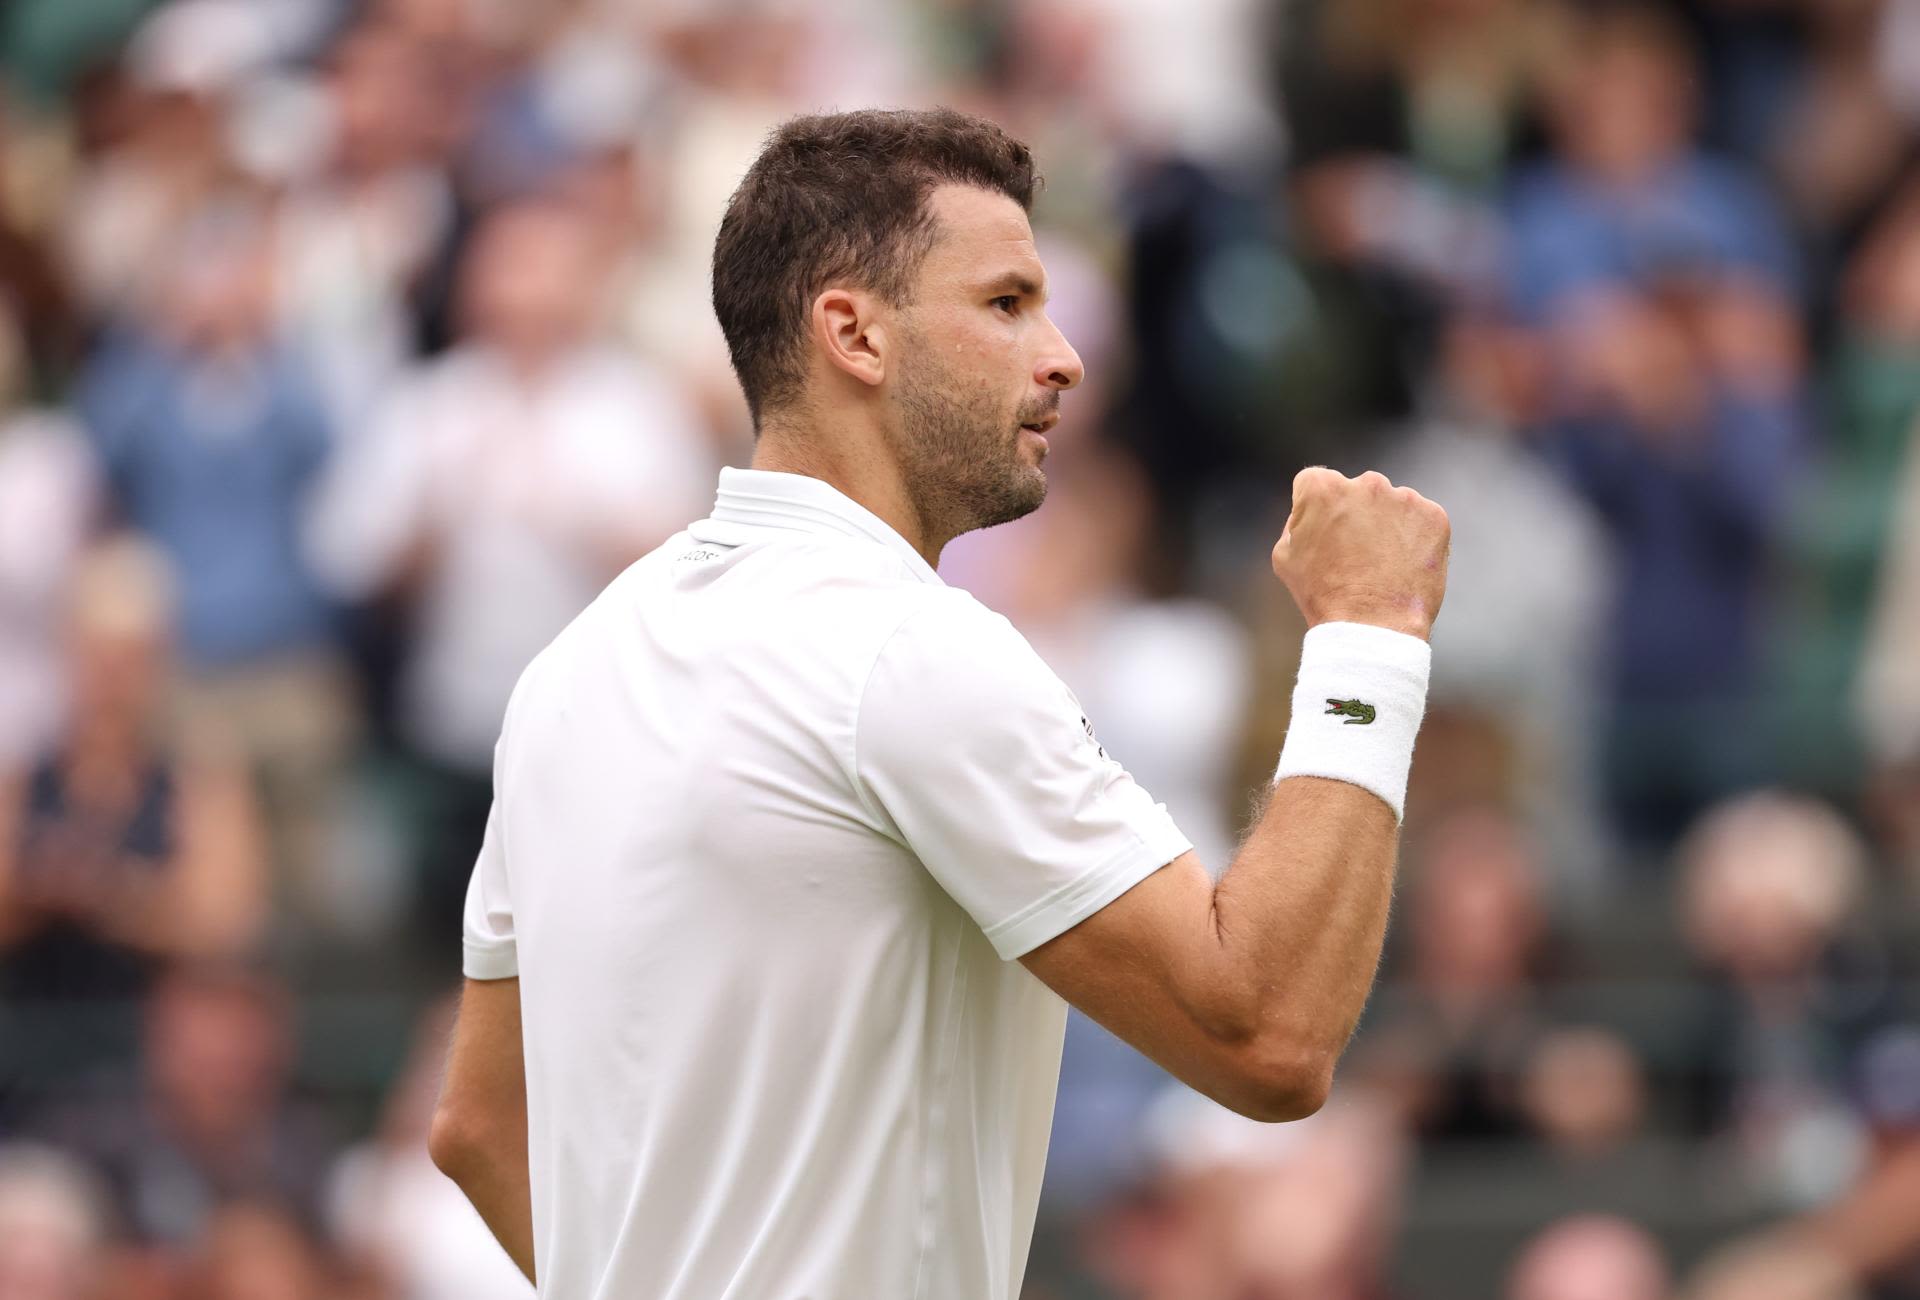 Dimitrov reveals who is the GOAT among Djokovic, Nadal and Federer